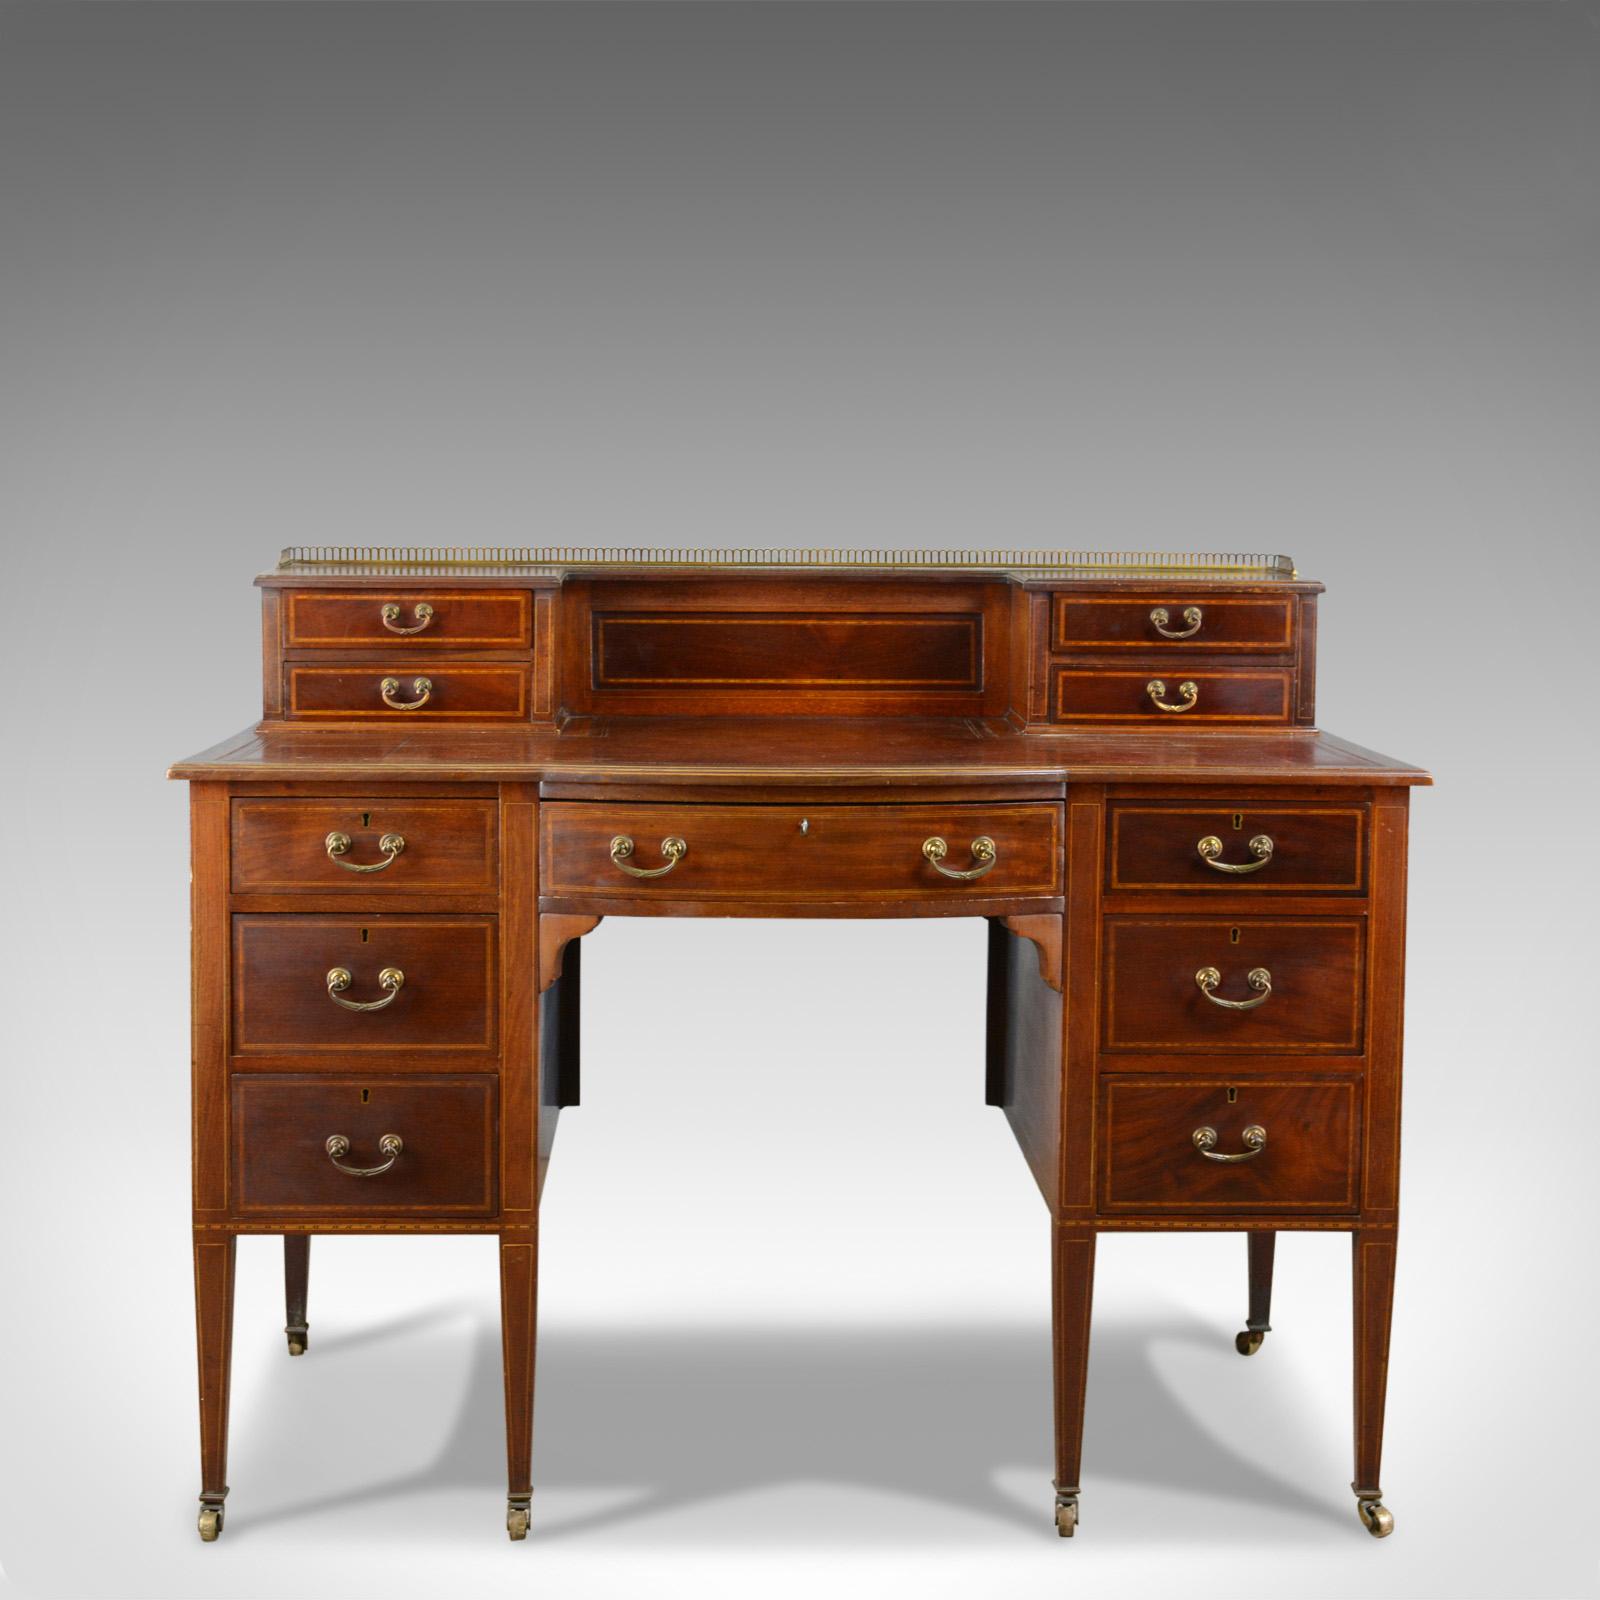 This is an antique writing desk, an English, Edwardian, mahogany knee-hole desk dating to the early 20th century, circa 1910.

An attractive writing desk of good proportion
Select mahogany displaying rich tones of russet hues
Grain interest